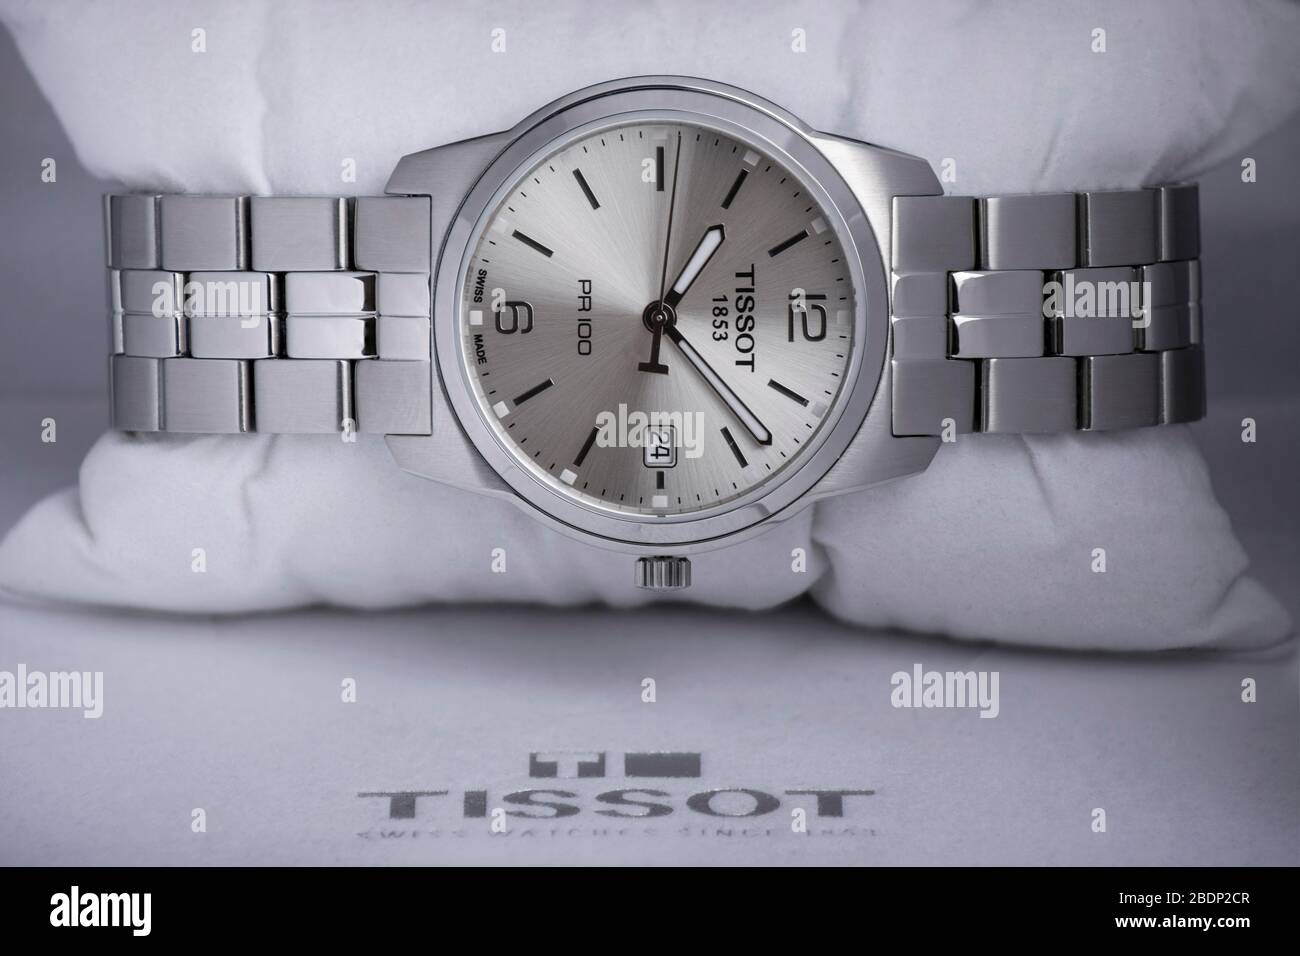 Alexandria, Egypt March 3, 2020 Tissot classic watch advertising inside the box surrounding the pillow Stock Photo